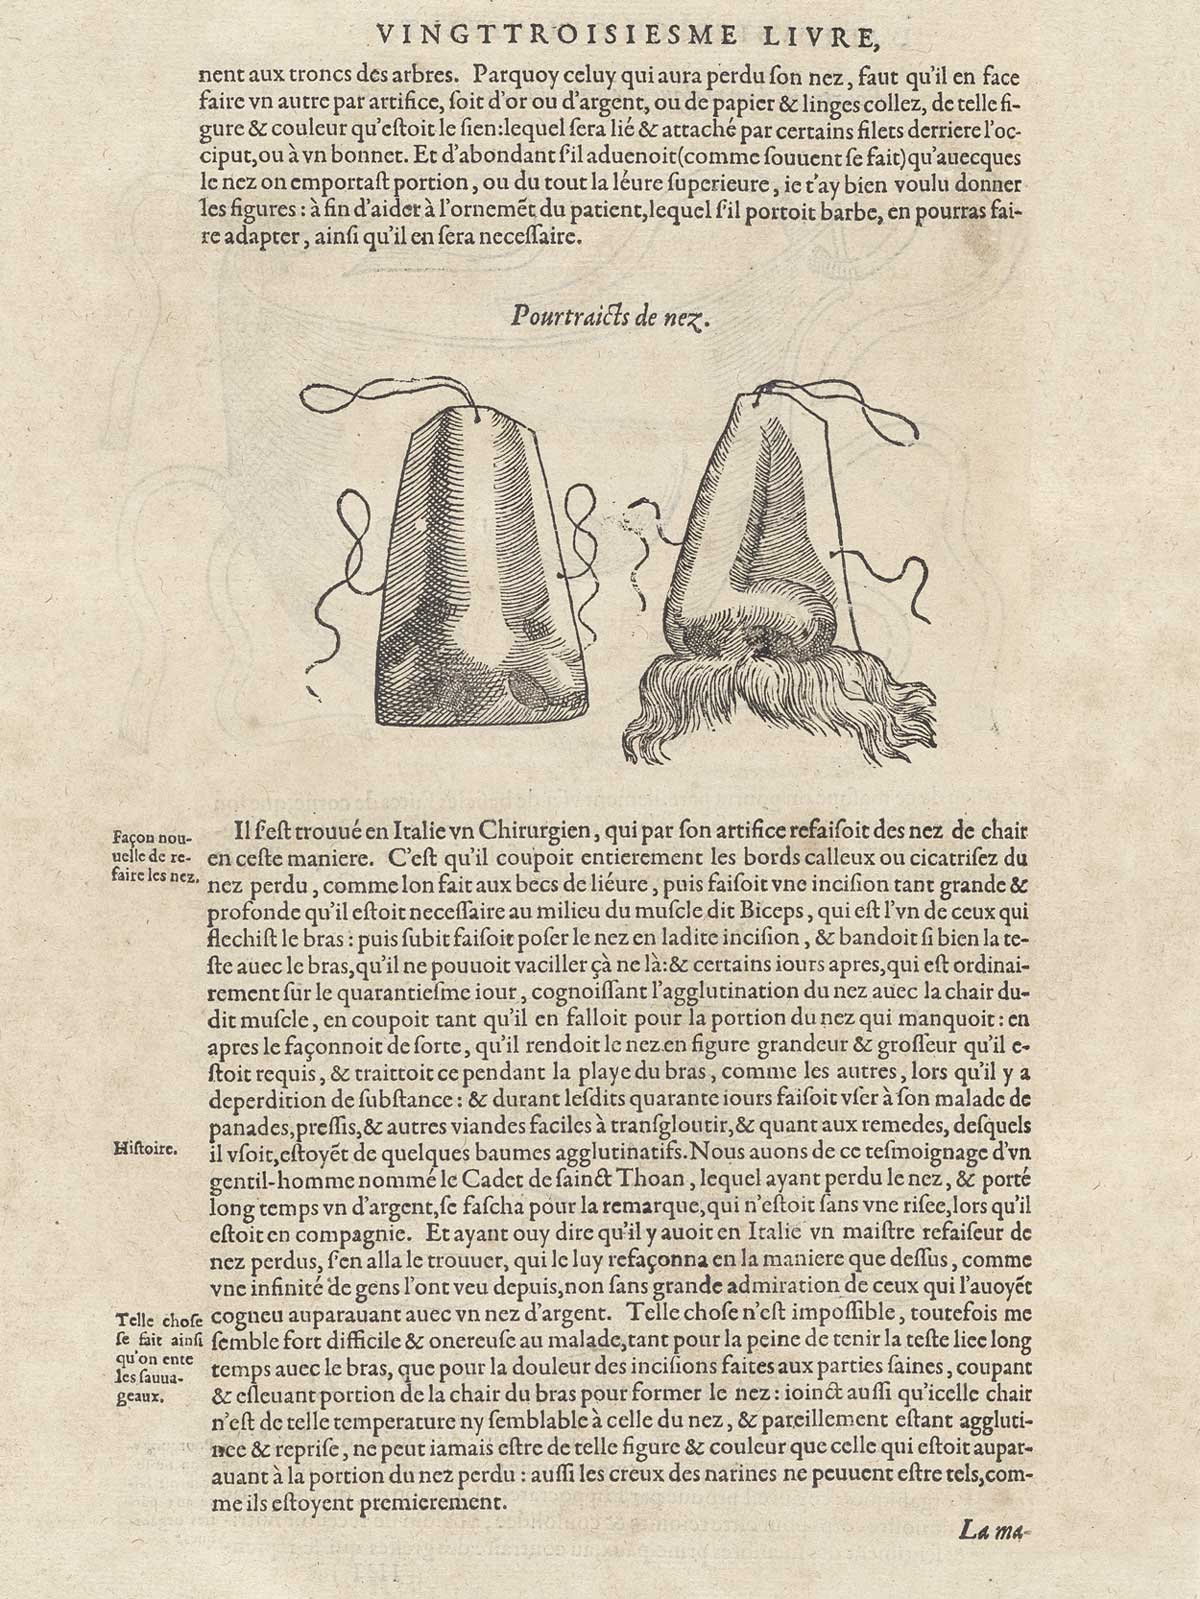 Woodcut of two prosthetic noses, the one on the right with a moustache, with typeset text in French above and below it, from Ambroise Paré’s Oeuvres, NLM Call no.: WZ 240 P227 1585.